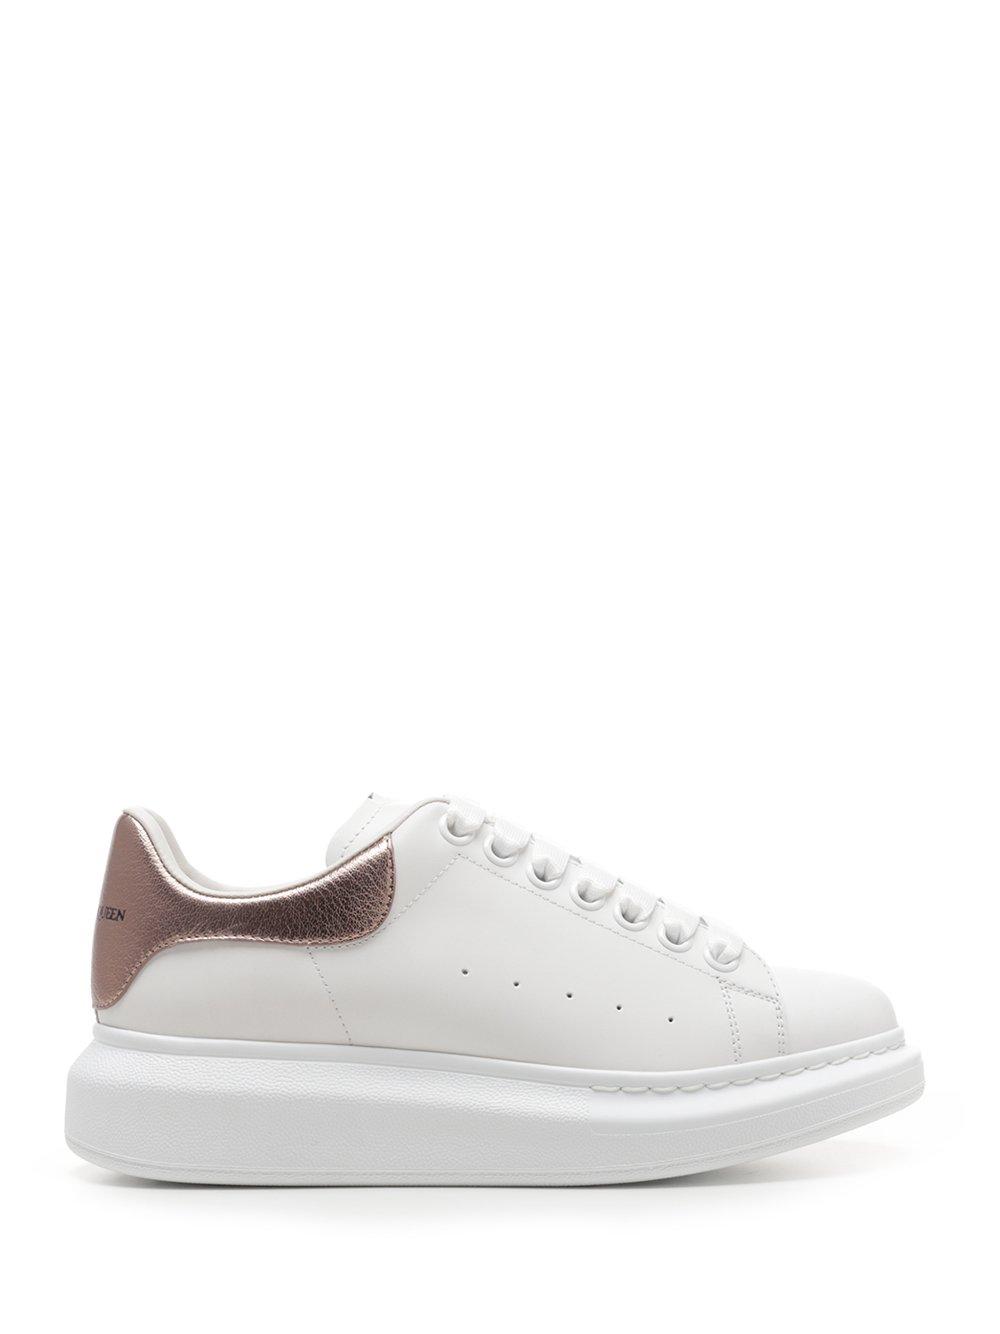 Alexander McQueen Leather Oversized Sneakers in White - Save 10% - Lyst